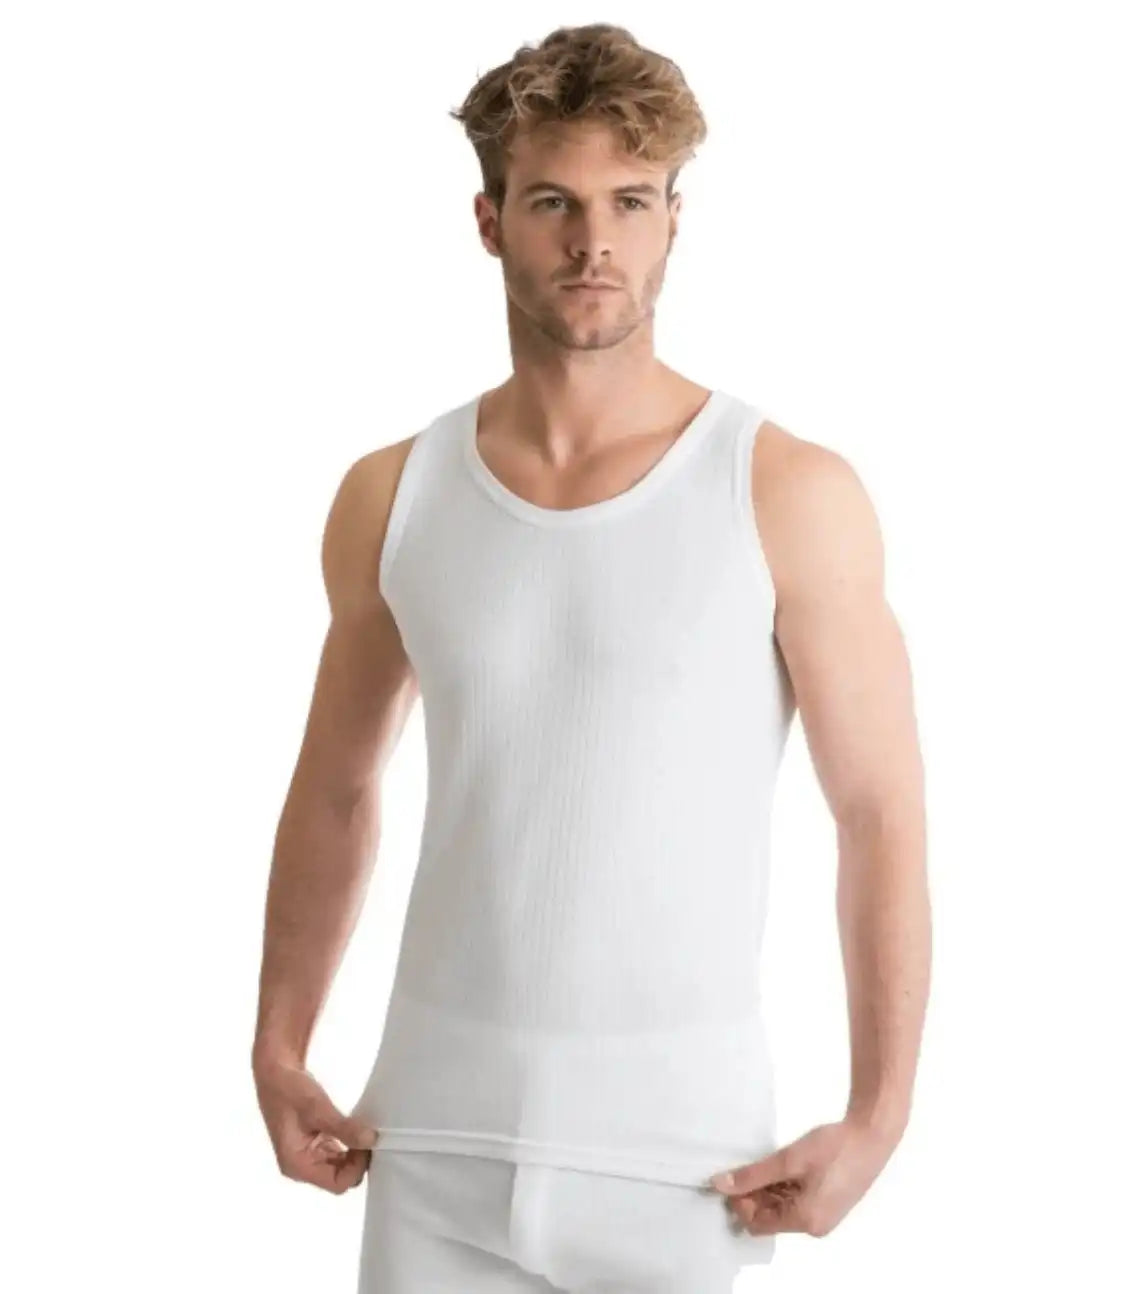 Ribbed Thermal Vest by Guardian